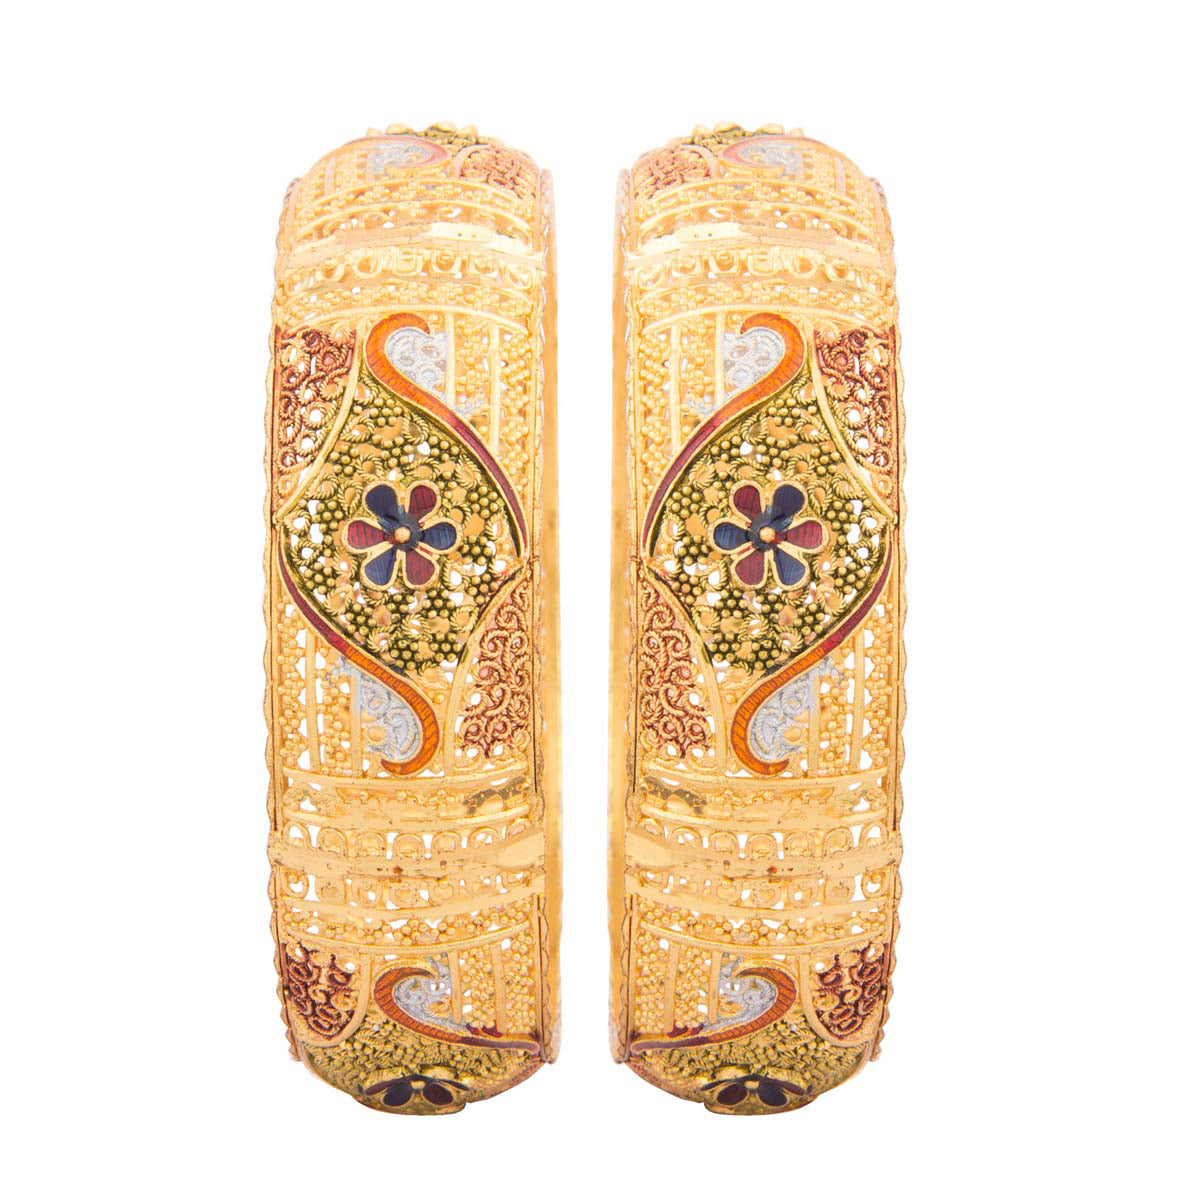 Reminding us of the golden eras gone by, this traditional gold kada set is decorated with cutwork filigree motifs set in mixed metal alloy with a yellow-gold finish. 